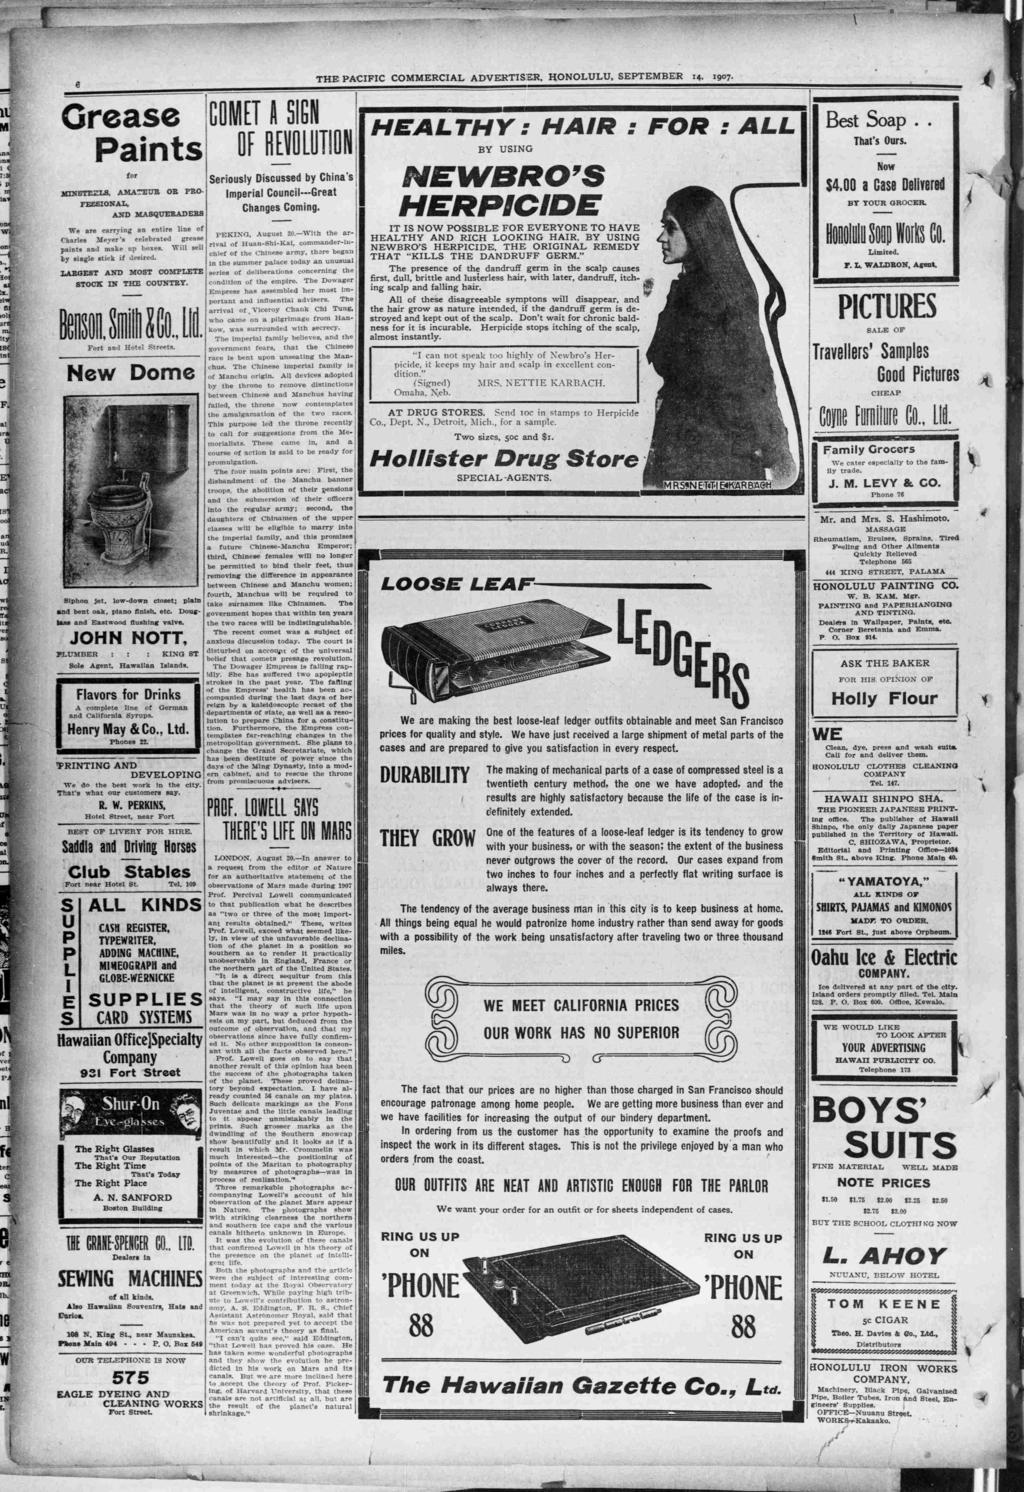 THE PACFC COMMERCAL ADVERTSER, HONOLULU, SEPTEMBER 4, 907 for 8 COMET A S N J9E mts BY USNG Best Soap OF HLUT Thats Ours Serously Dscussed by Chnas Now $400 a Case Delvered KXXSTEZLS, AMATEUB OB PRO